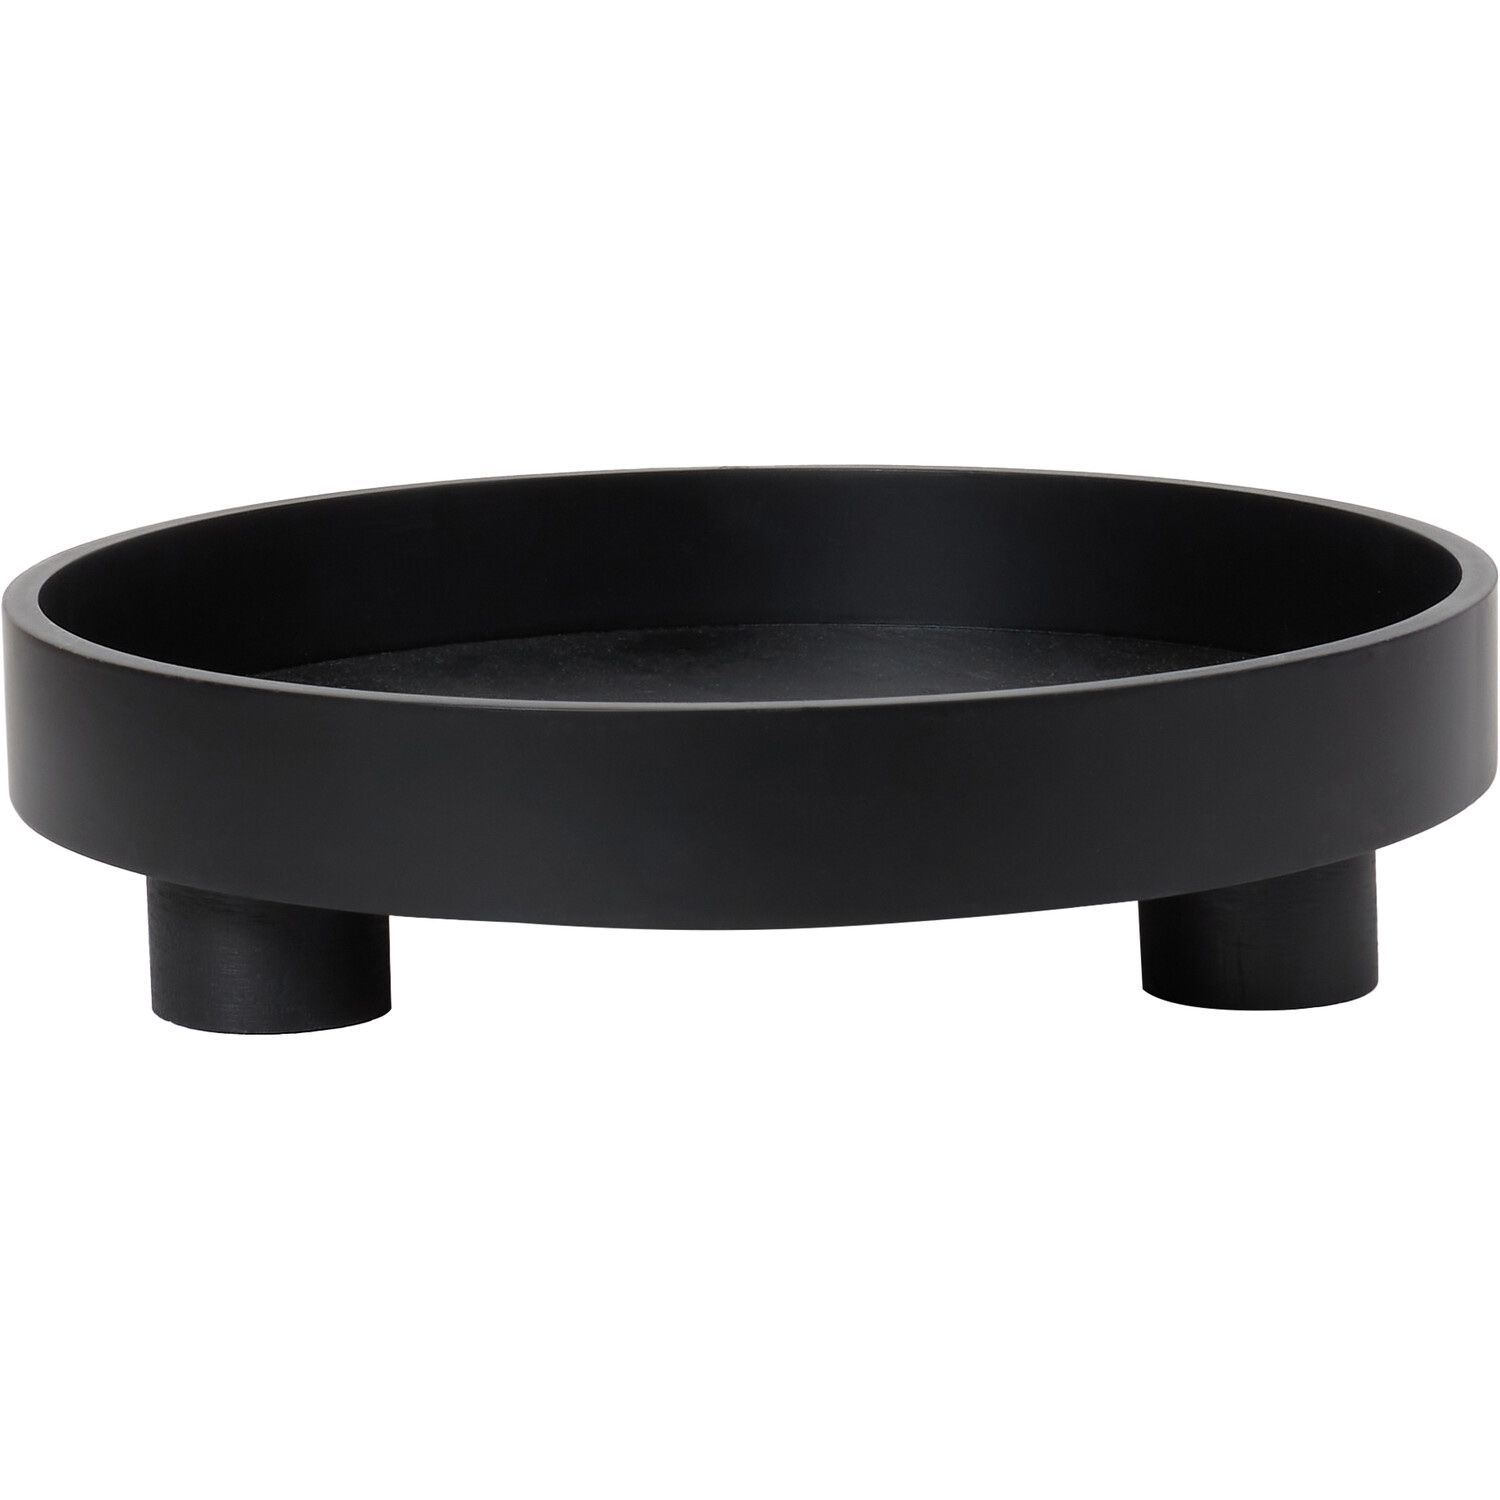 Footed Tray - Black Image 1